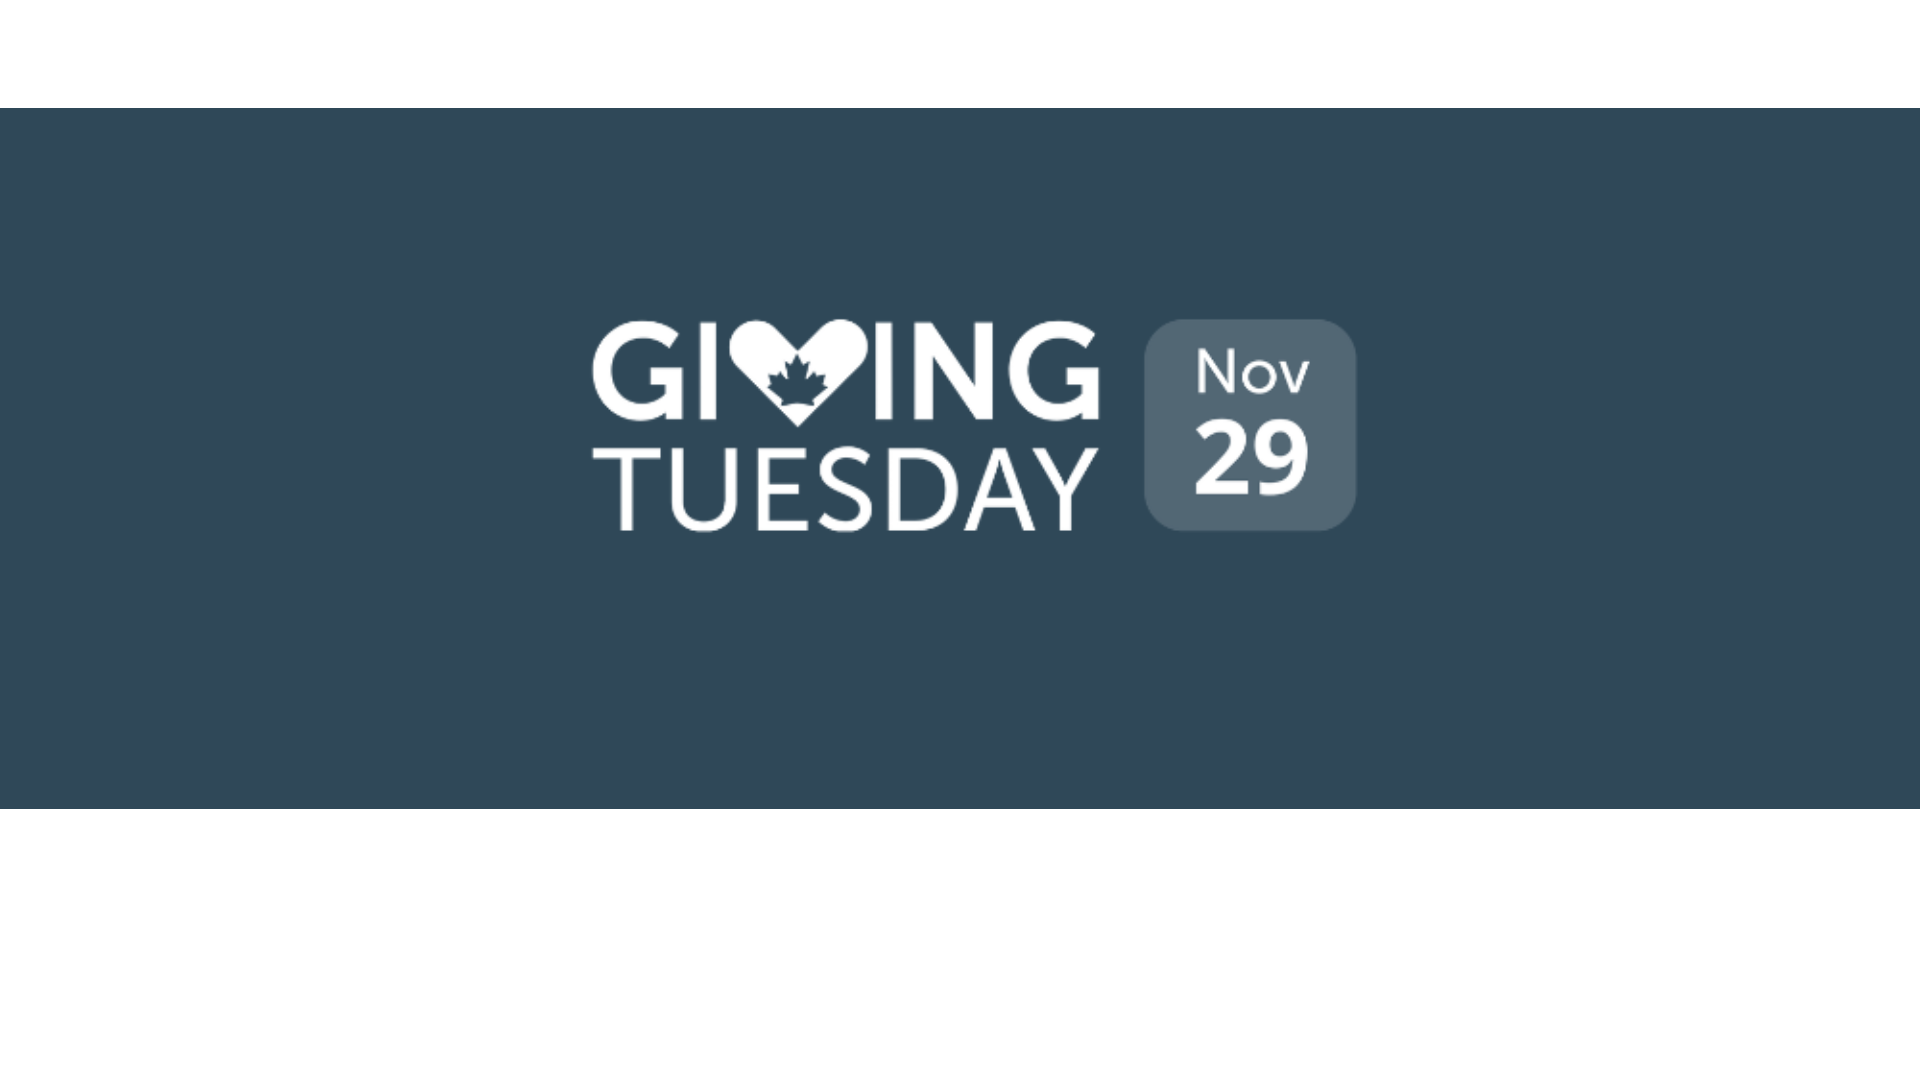 Make a donation to Giving Tuesday!